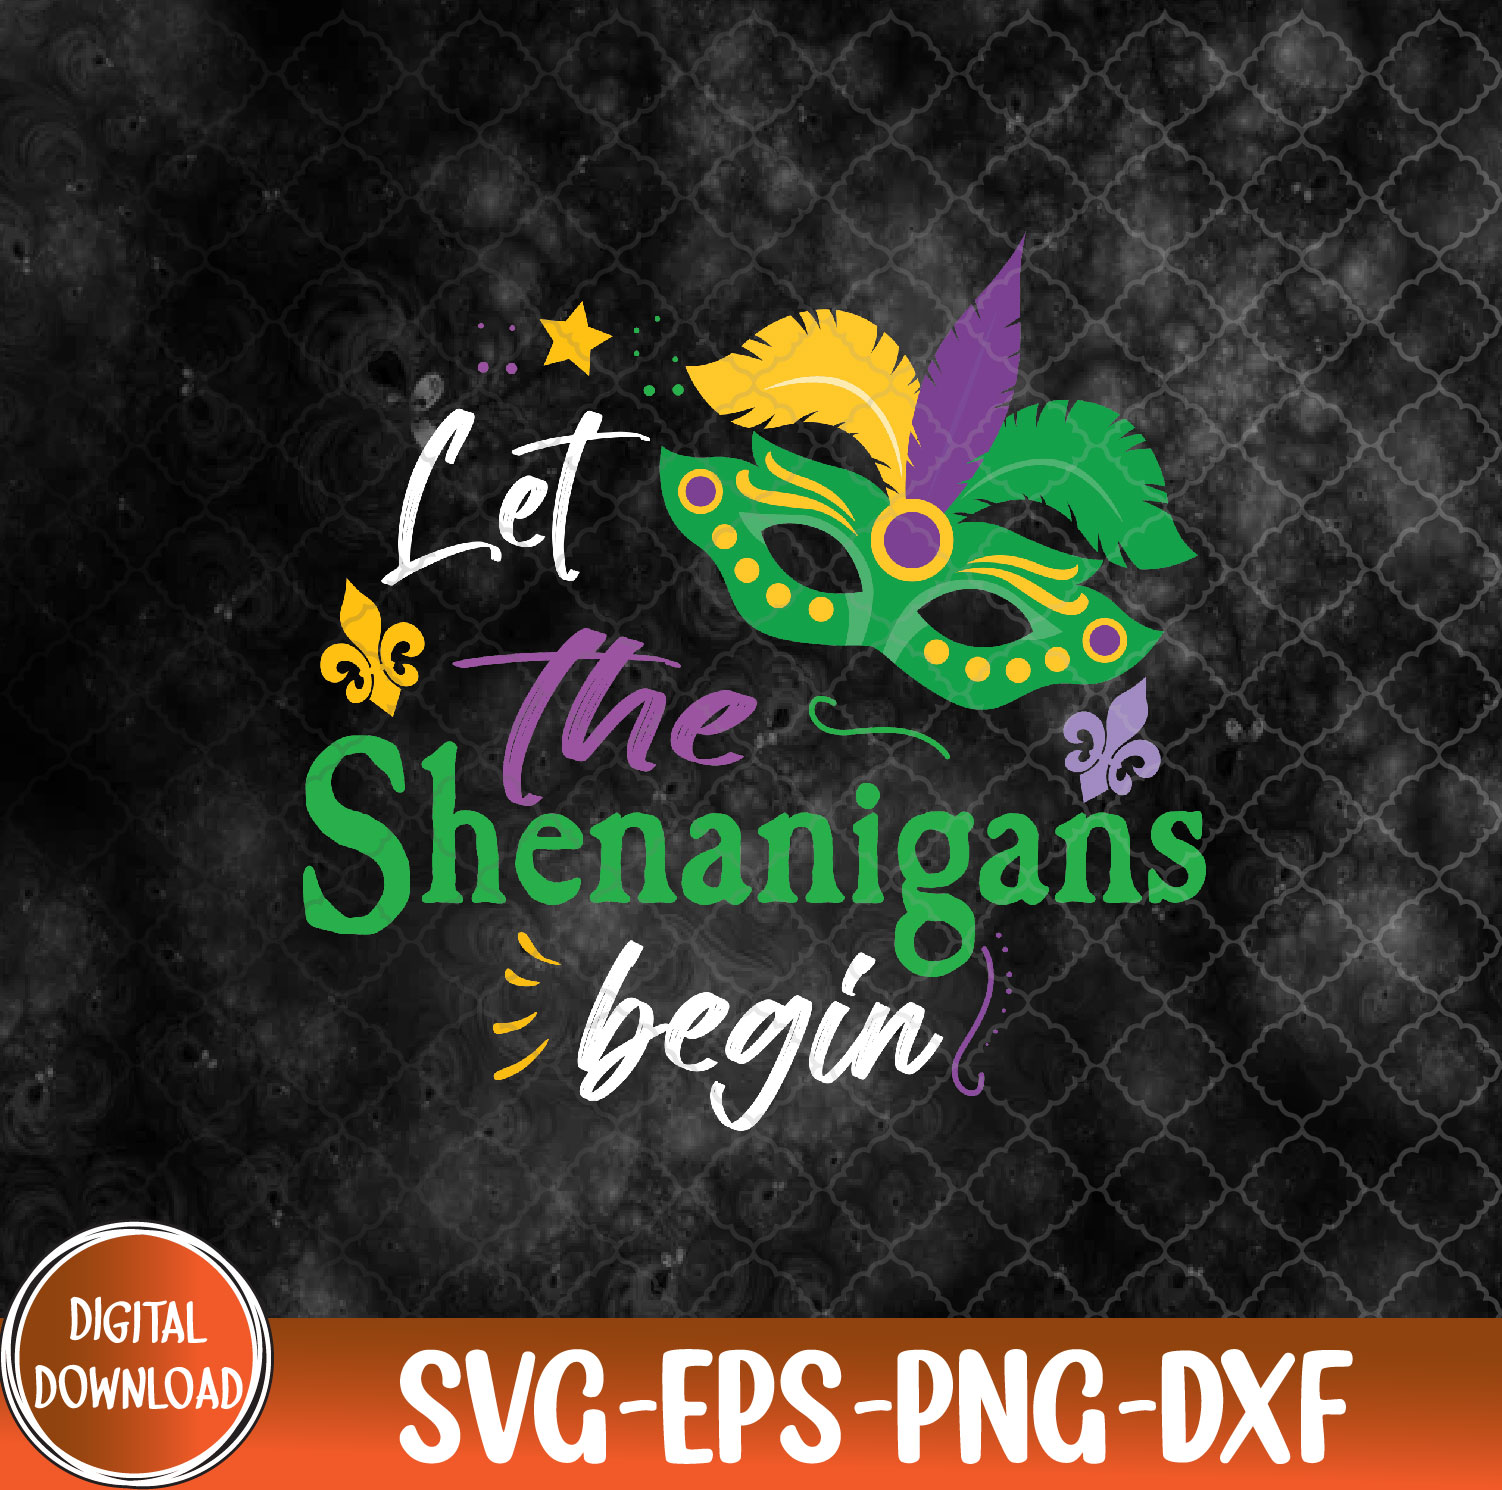 WTMNEW9file 09 115 Mardi Gras Costume Let The Shenanigans Begin Mask, Mardi Gras svg, Shenanigans svg, Svg, Eps, Png, Dxf